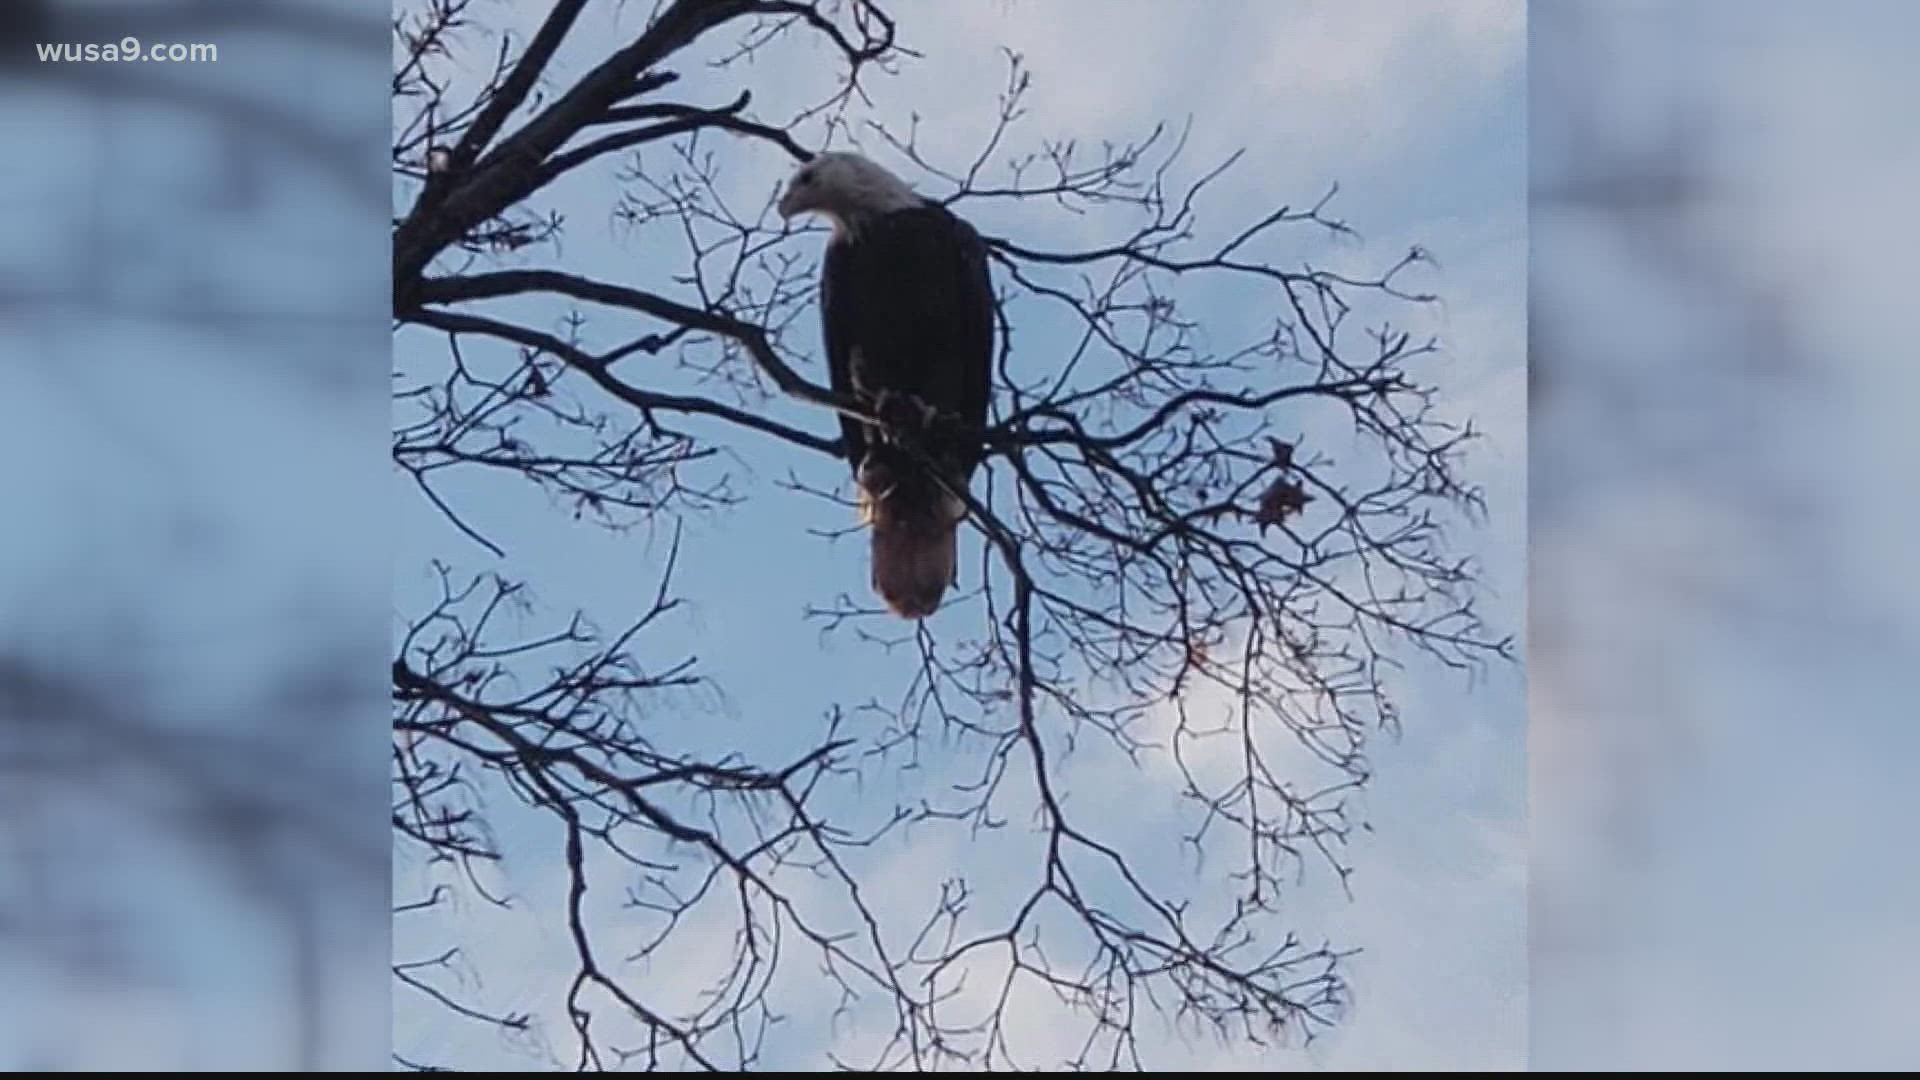 One Twitter user spotted a bald eagle near the Washington Monument and claims it is a sign that the District should be given statehood.